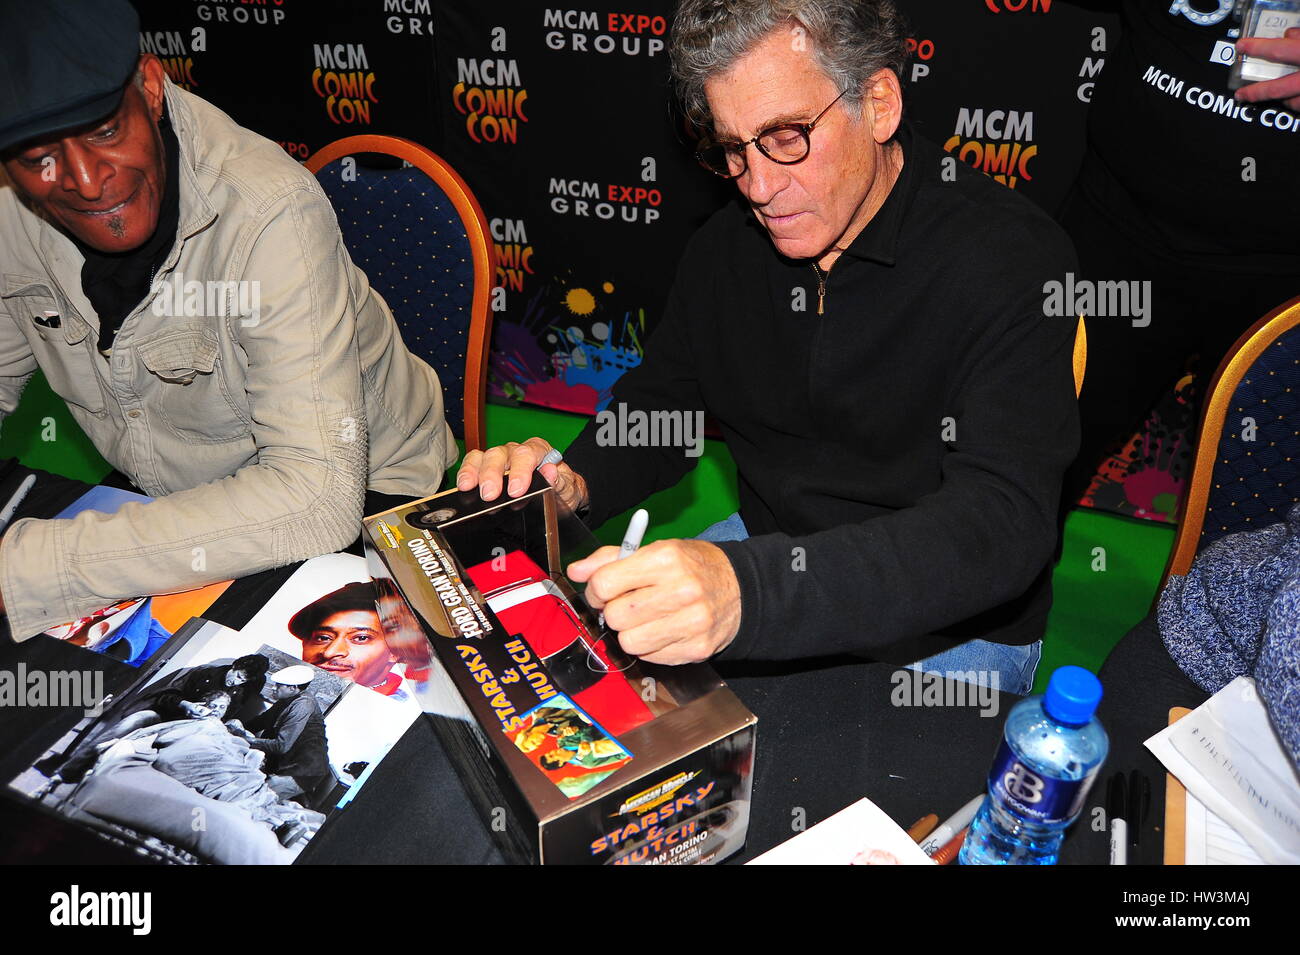 Starsky & Hutch stars Paul Michael Glaser & Antonio Fargas sign items for fans at the Liverpool MCM Comicon. Stock Photo